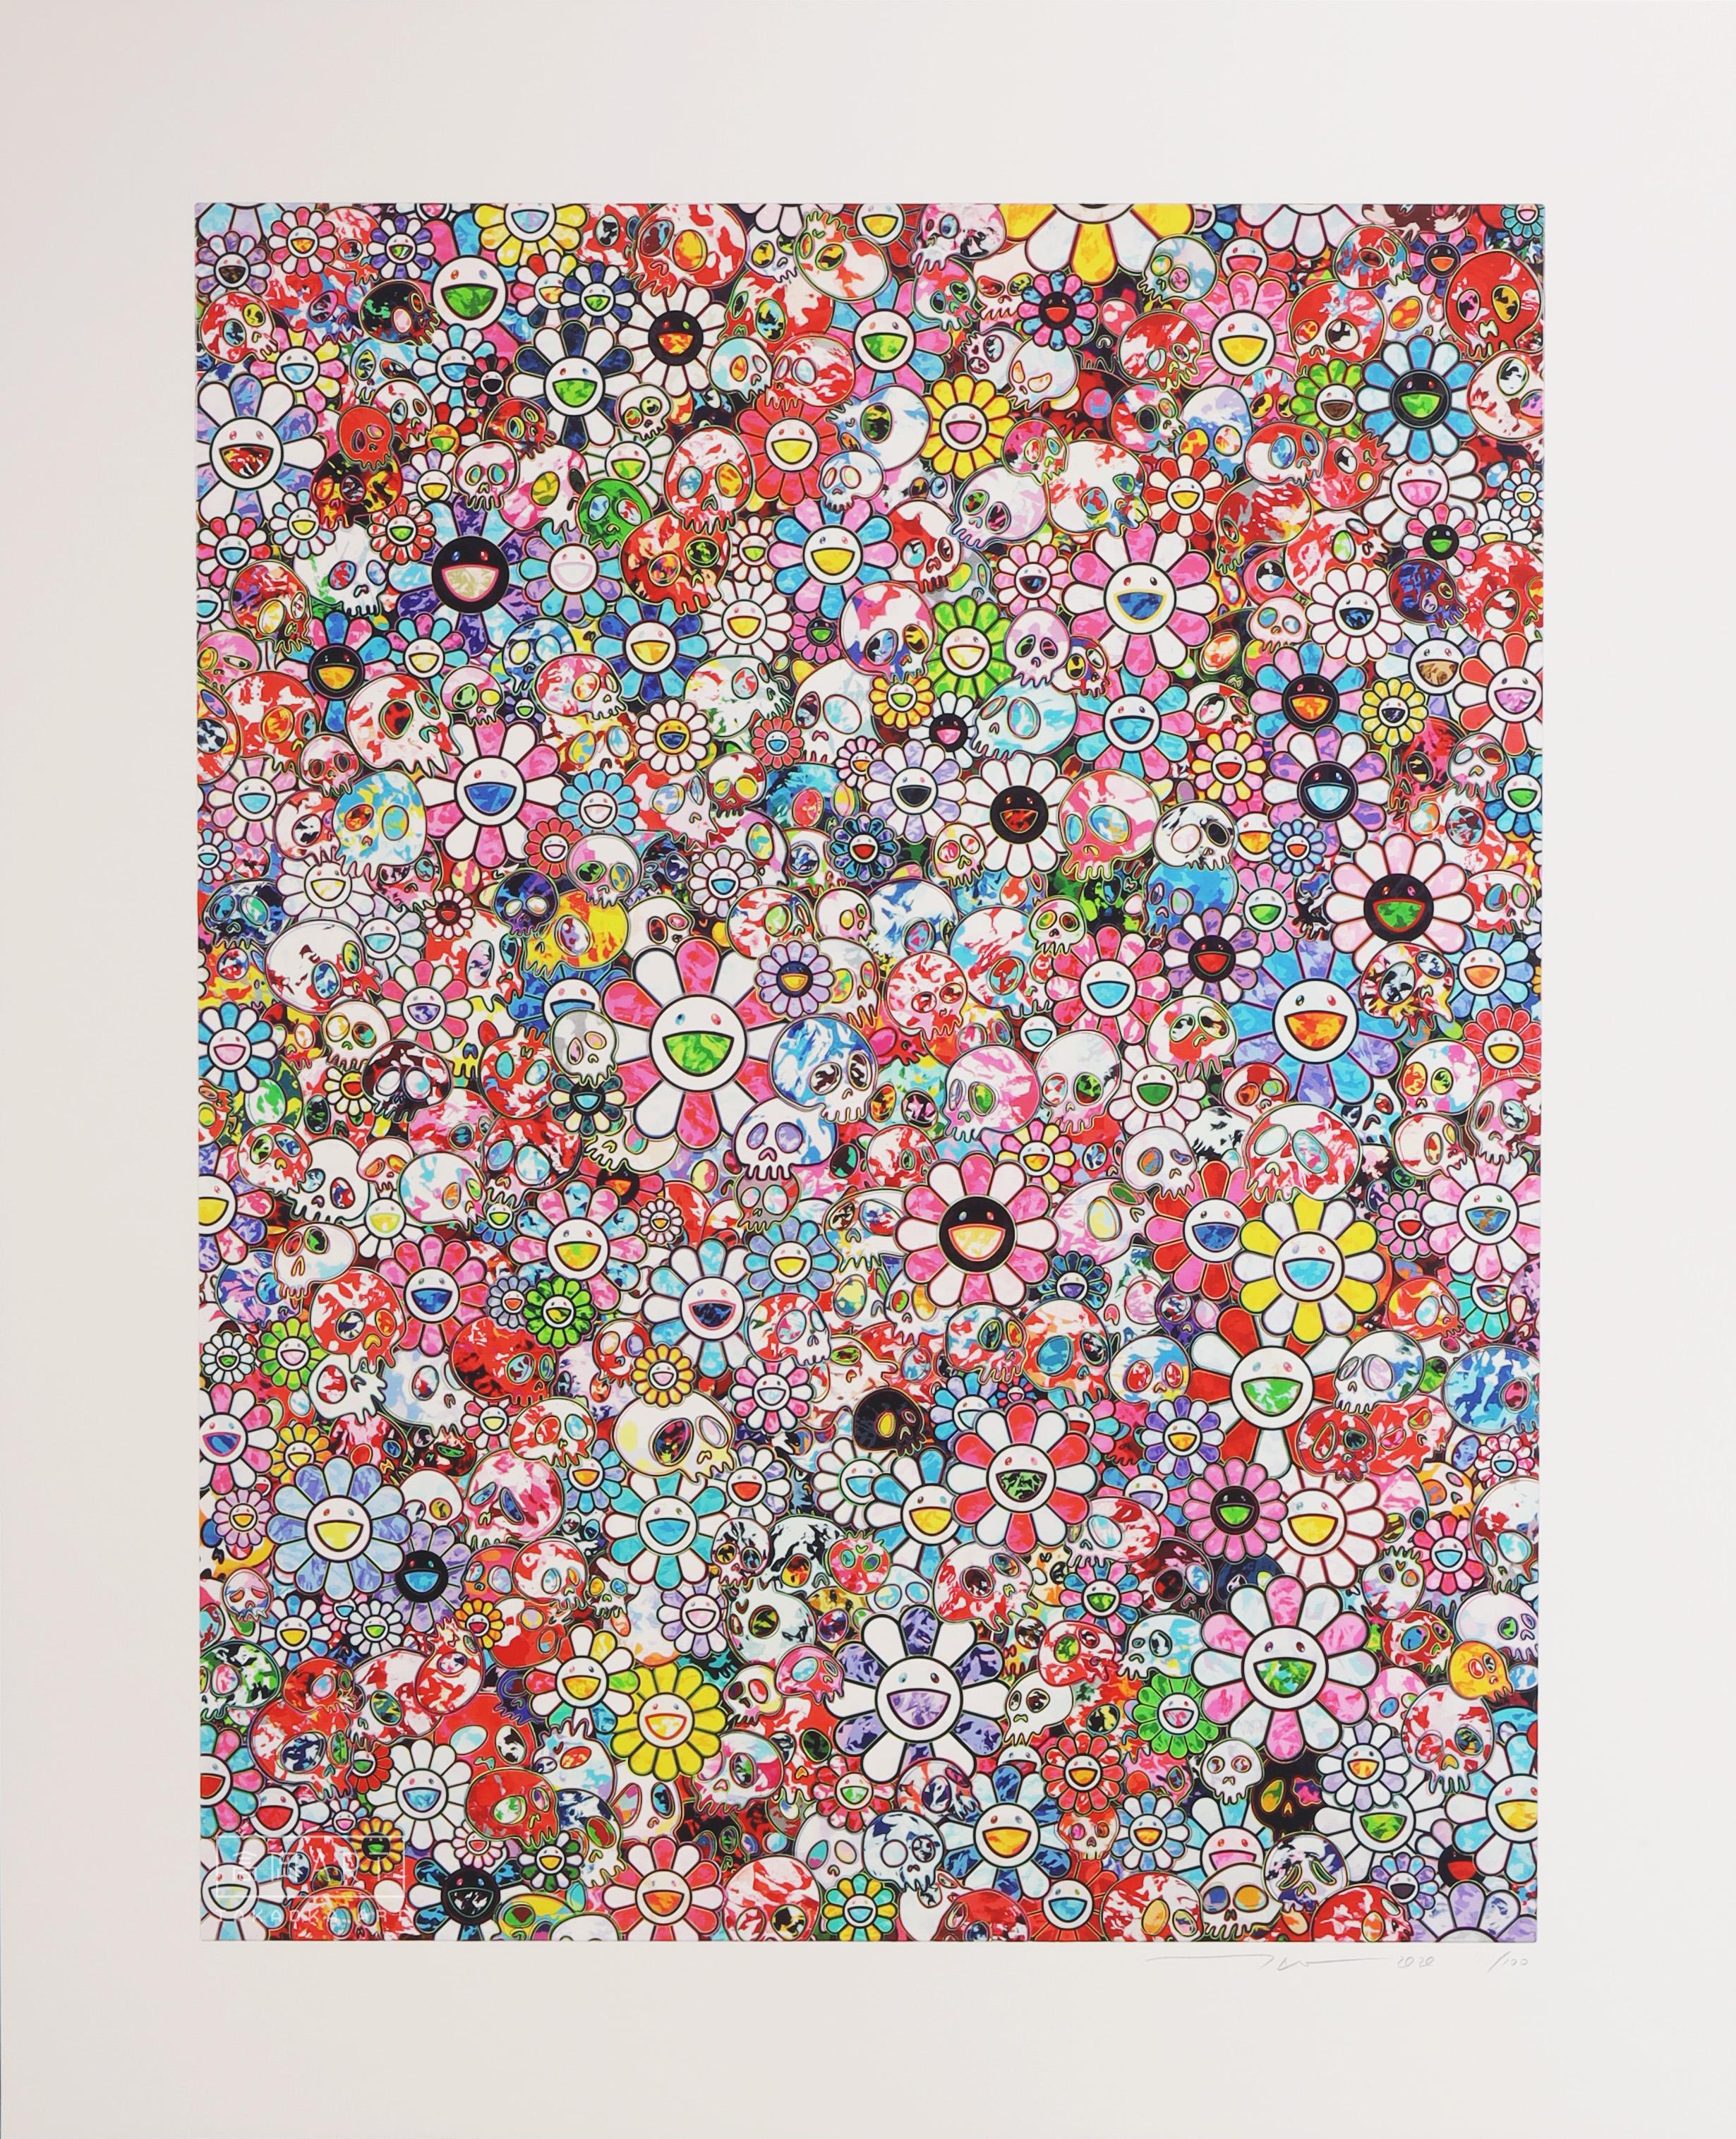 Artist: Takashi Murakami
Title: ∞∞∞ (Infinity) 
Year: 2020
Edition: 100
Size: 568 x 437mm (image size) / 700 x 570mm (sheet size)
Medium: Archival pigment print

This is hand signed by Takashi Murakami.

Note: This will be shipped from Japan so the